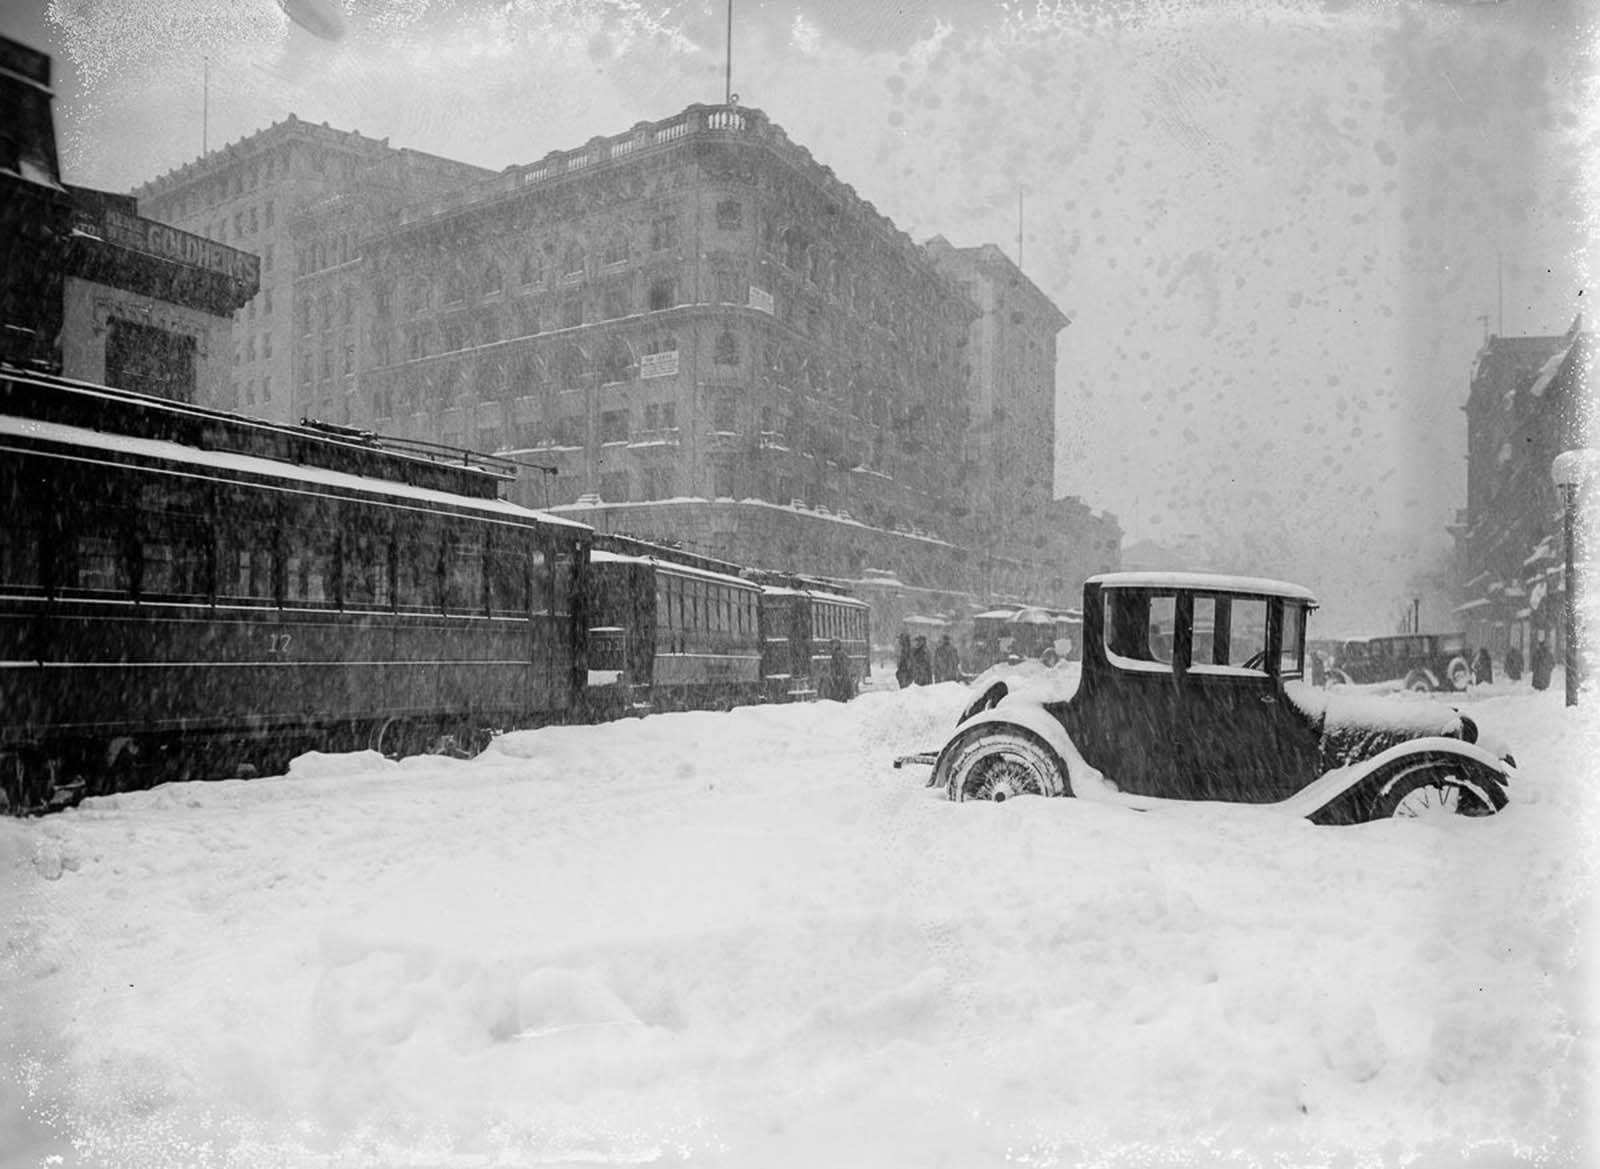 The Knickerbocker Storm: Historical Photos of the deadliest Blizzard in ...